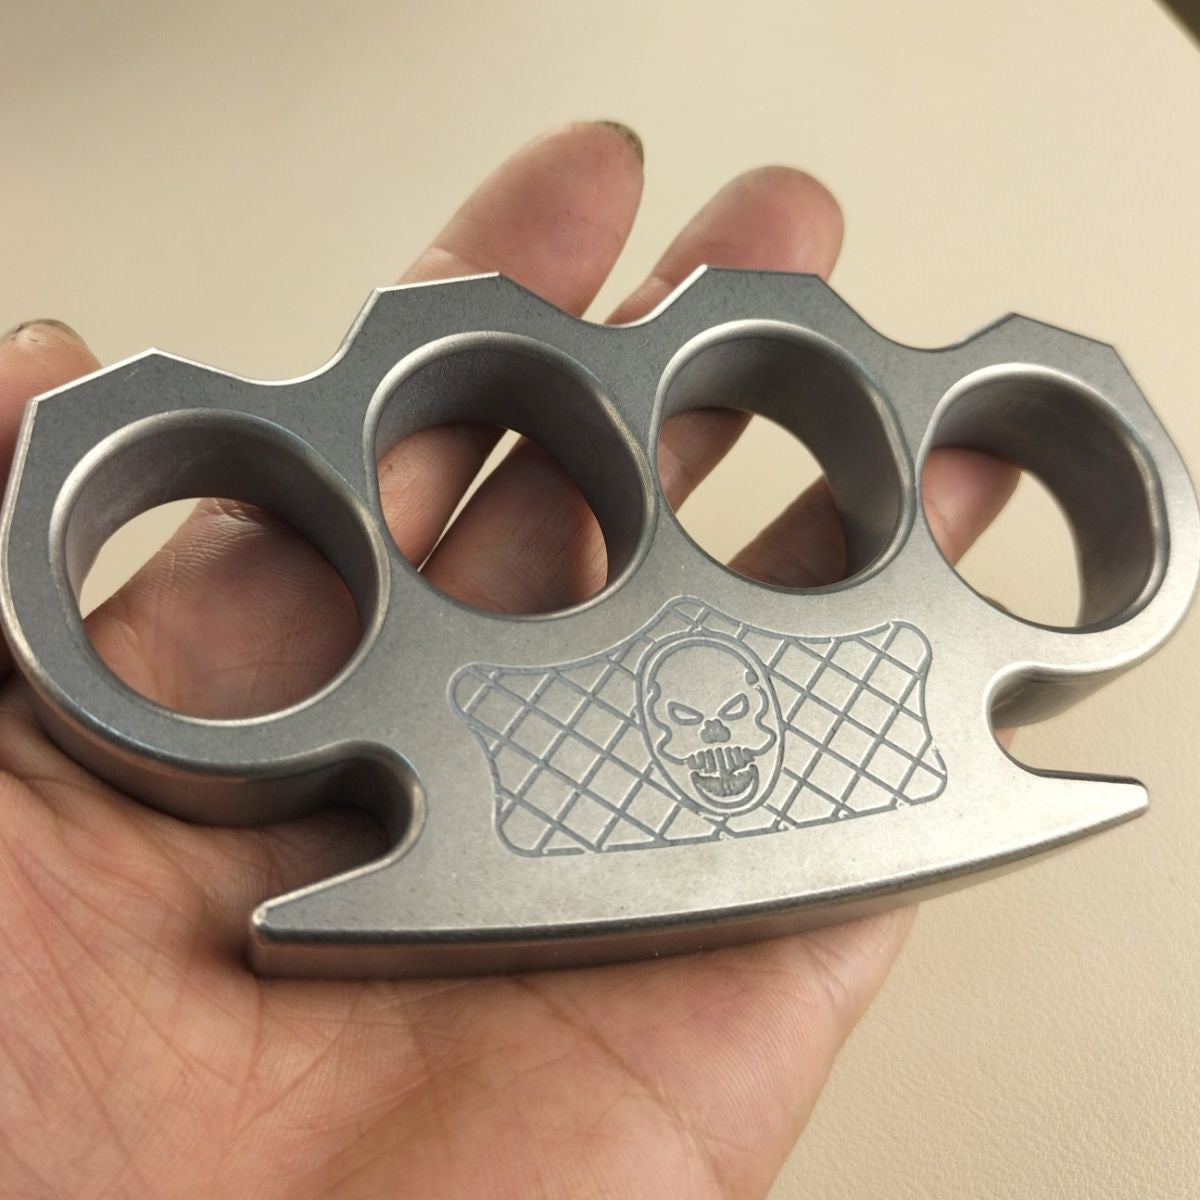 MAX KNIVES HANDCUFFS AND GUNS BRASS KNUCKLES - Wicked Store